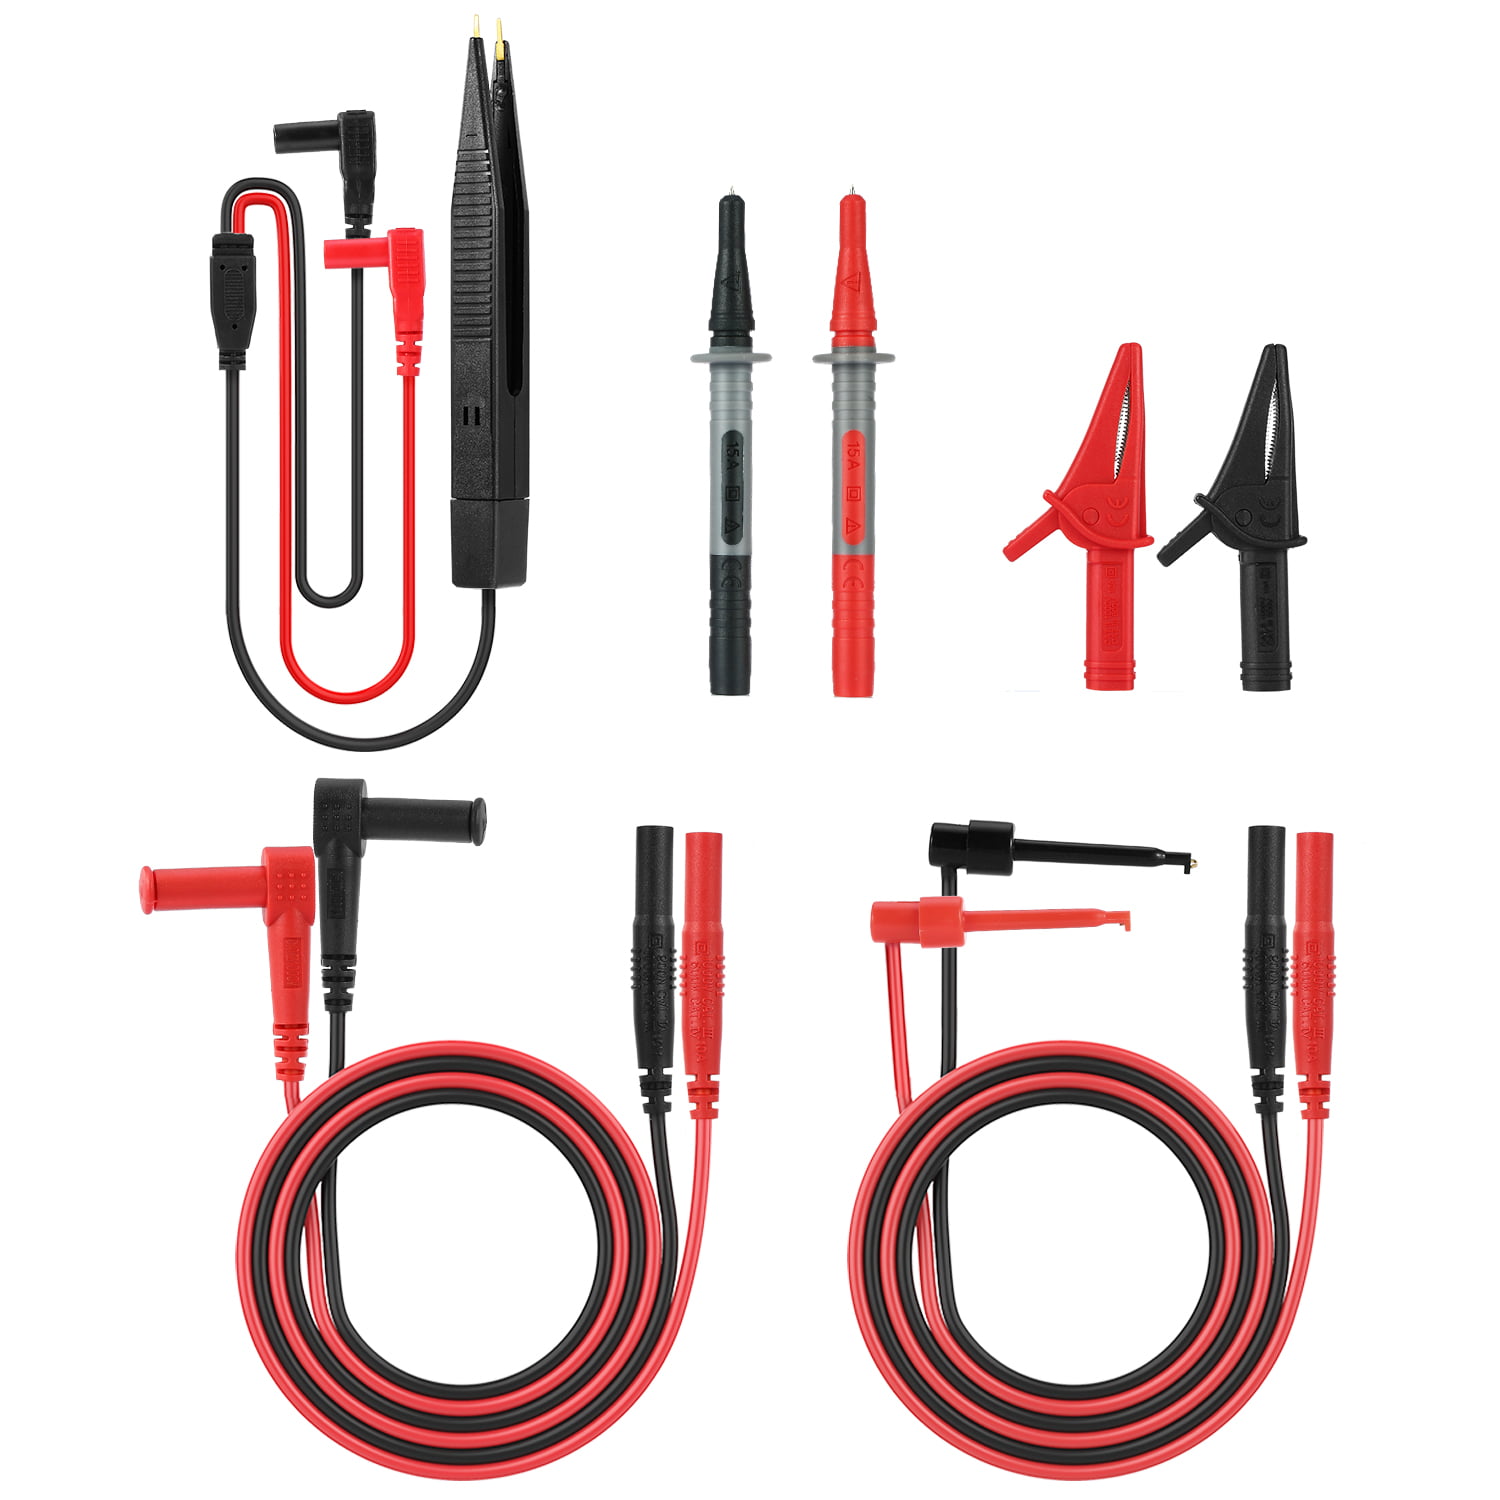 Details about   Auto Car Multi-Meter Test Leads Set Insulation Piercing Clip&Probe For Fluke HOT 